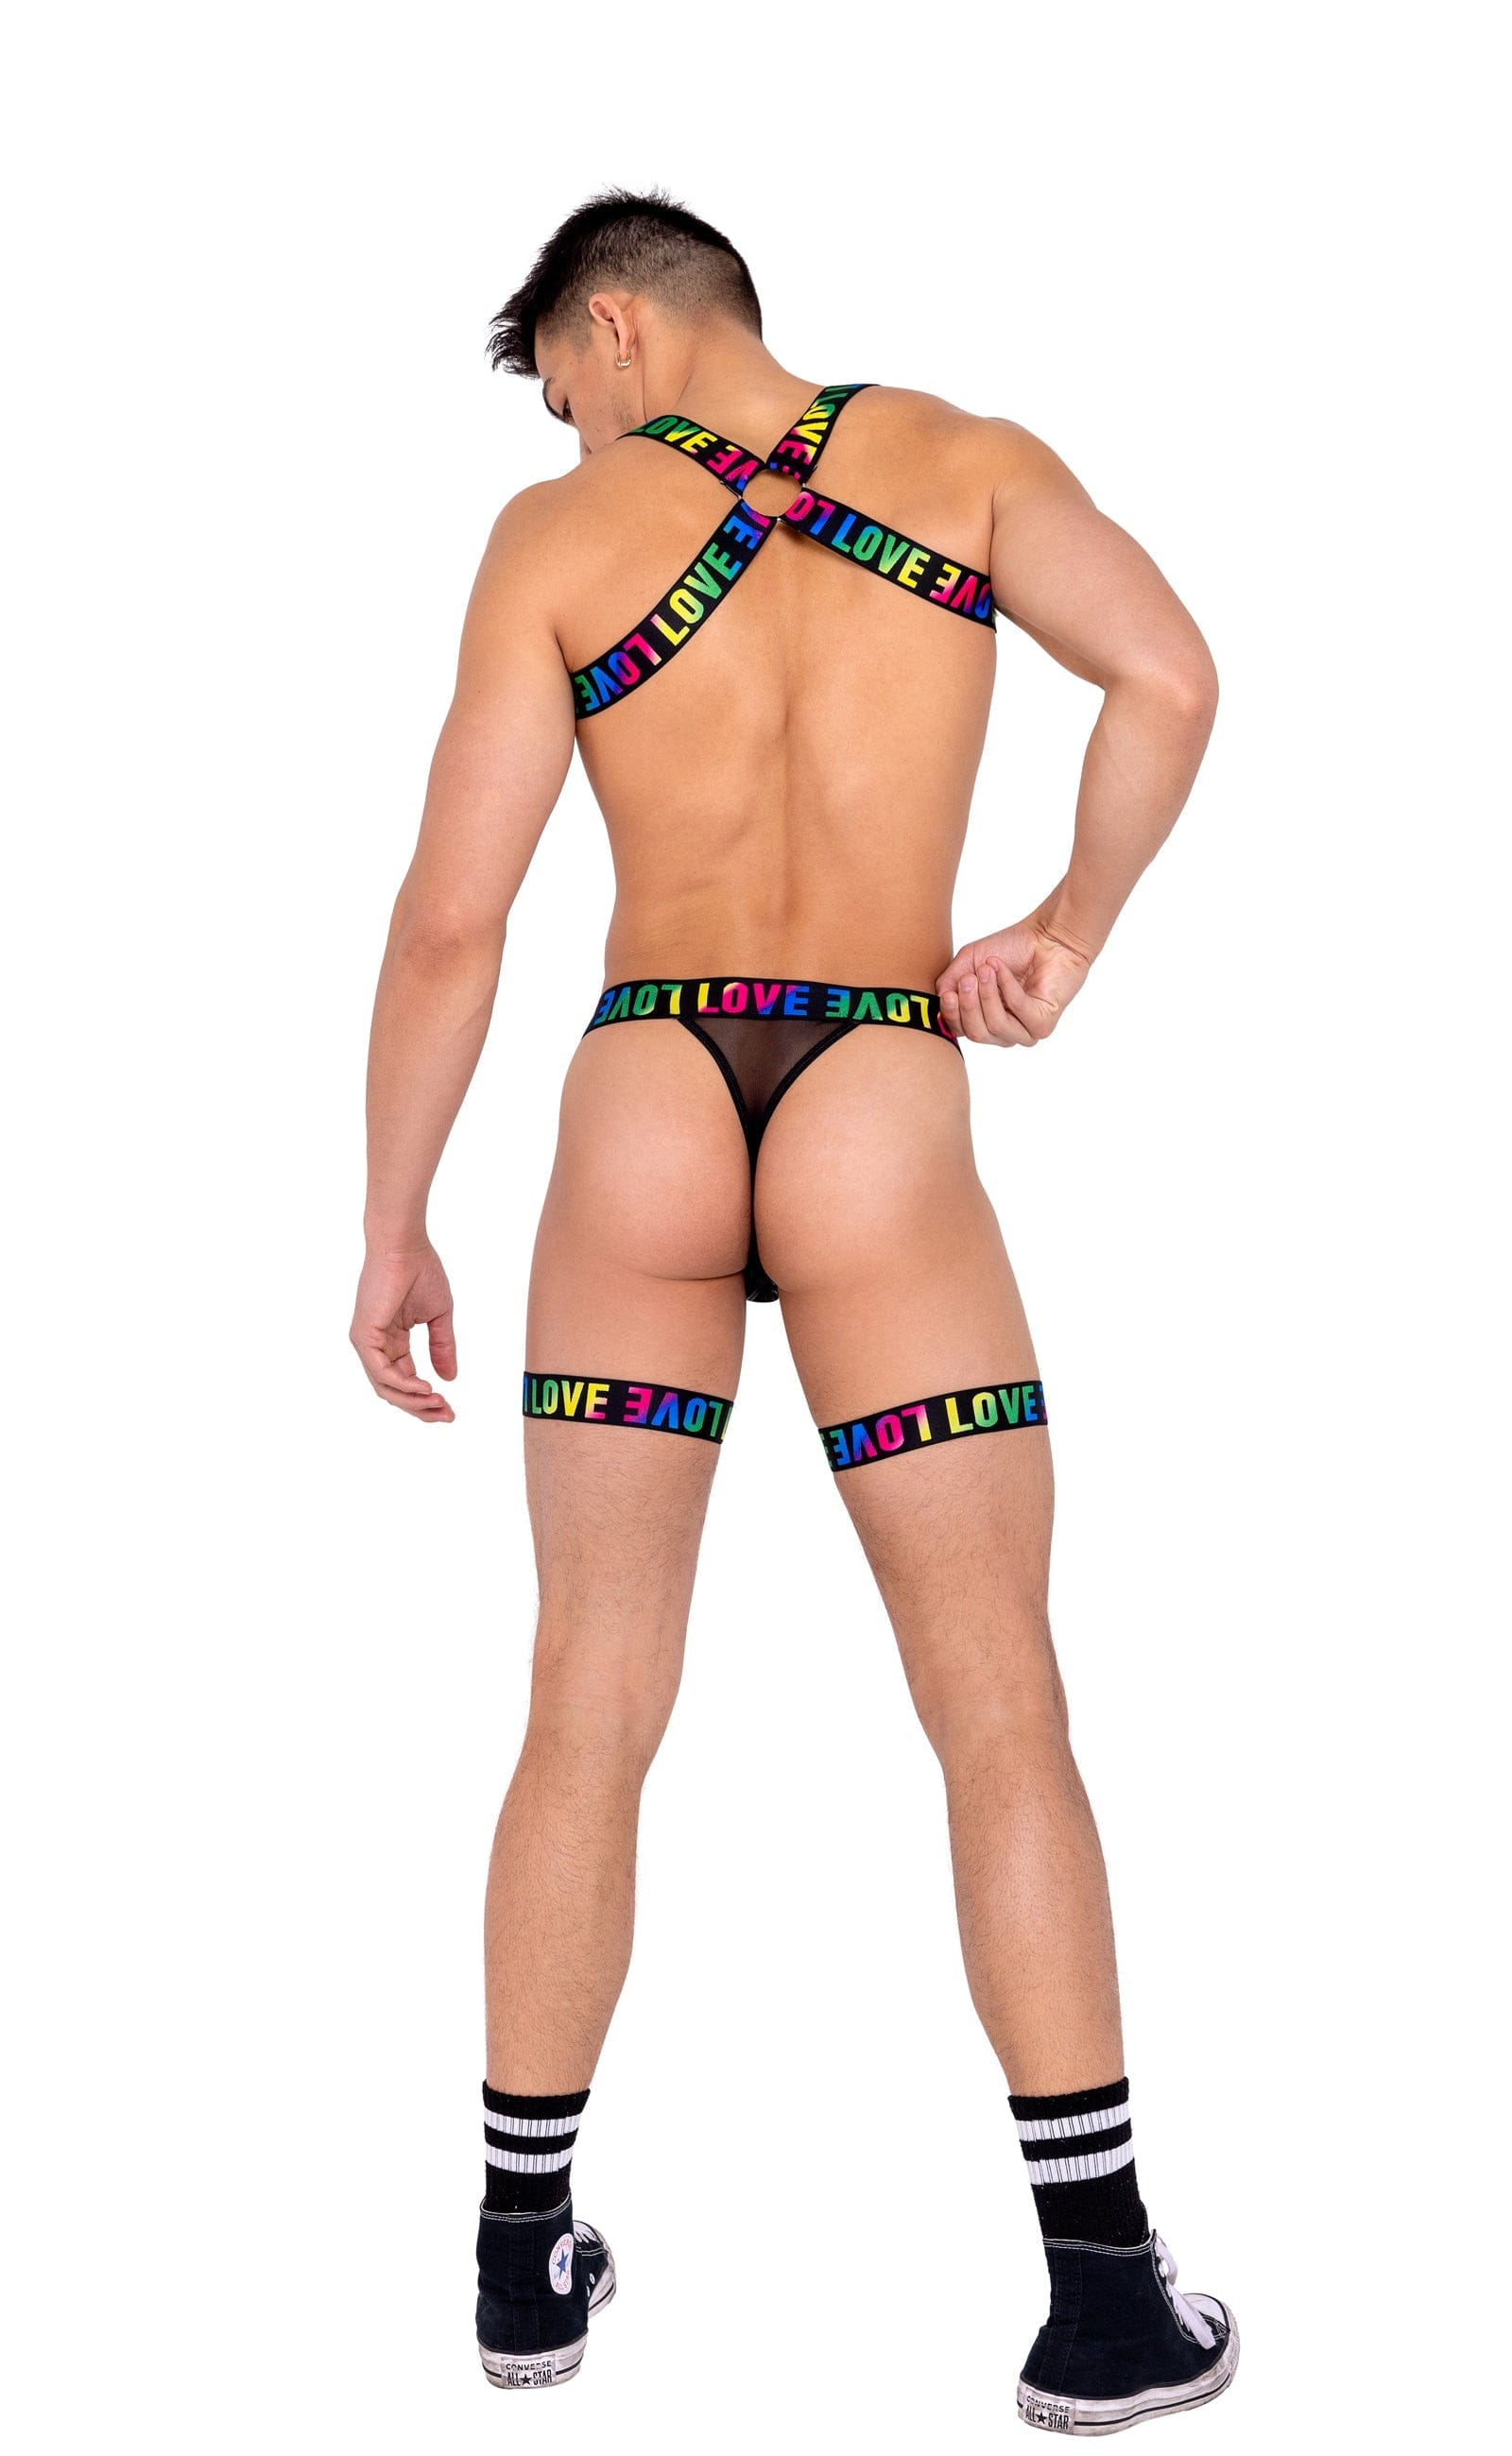 Roma S/M / Black Men’s Pride Chain & Ring Detail Harness Top 6157-Blk/Multi-S/M 2022 Men’s Pride Chain & Ring Detail Harness Top Ravewear Apparel & Accessories > Clothing > Shirts & Tops